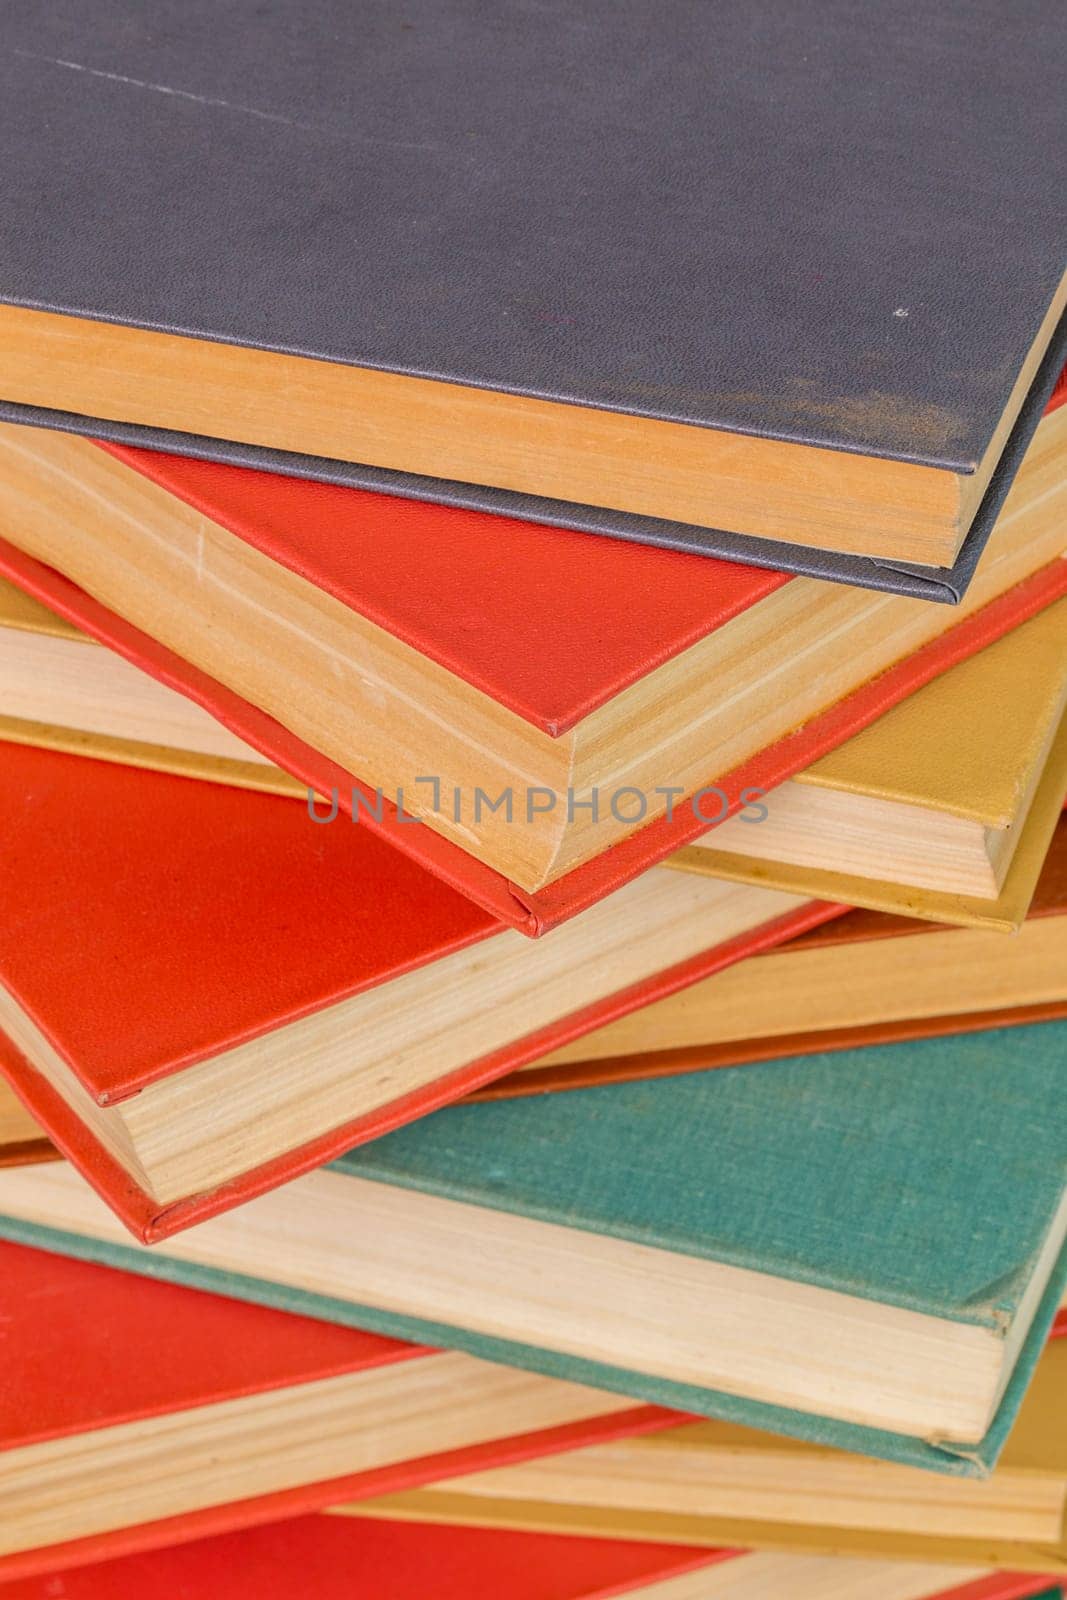 abstract books background - old red and muted green ones in a vertical stack by z1b